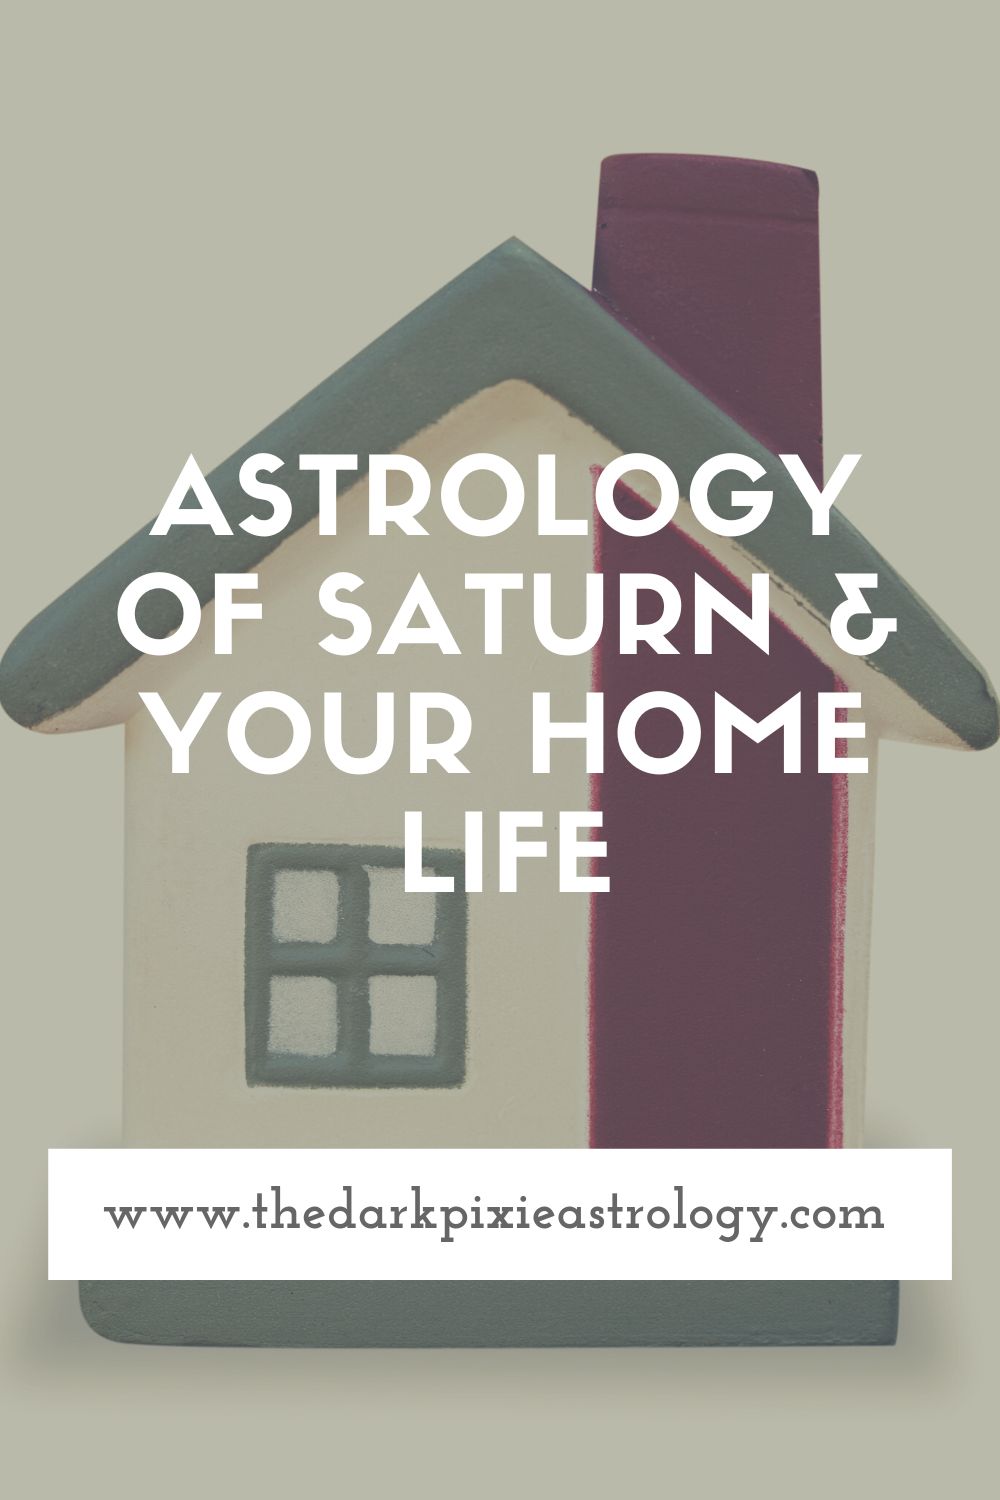 Astrology of Saturn & Your Home Life - The Dark Pixie Astrology